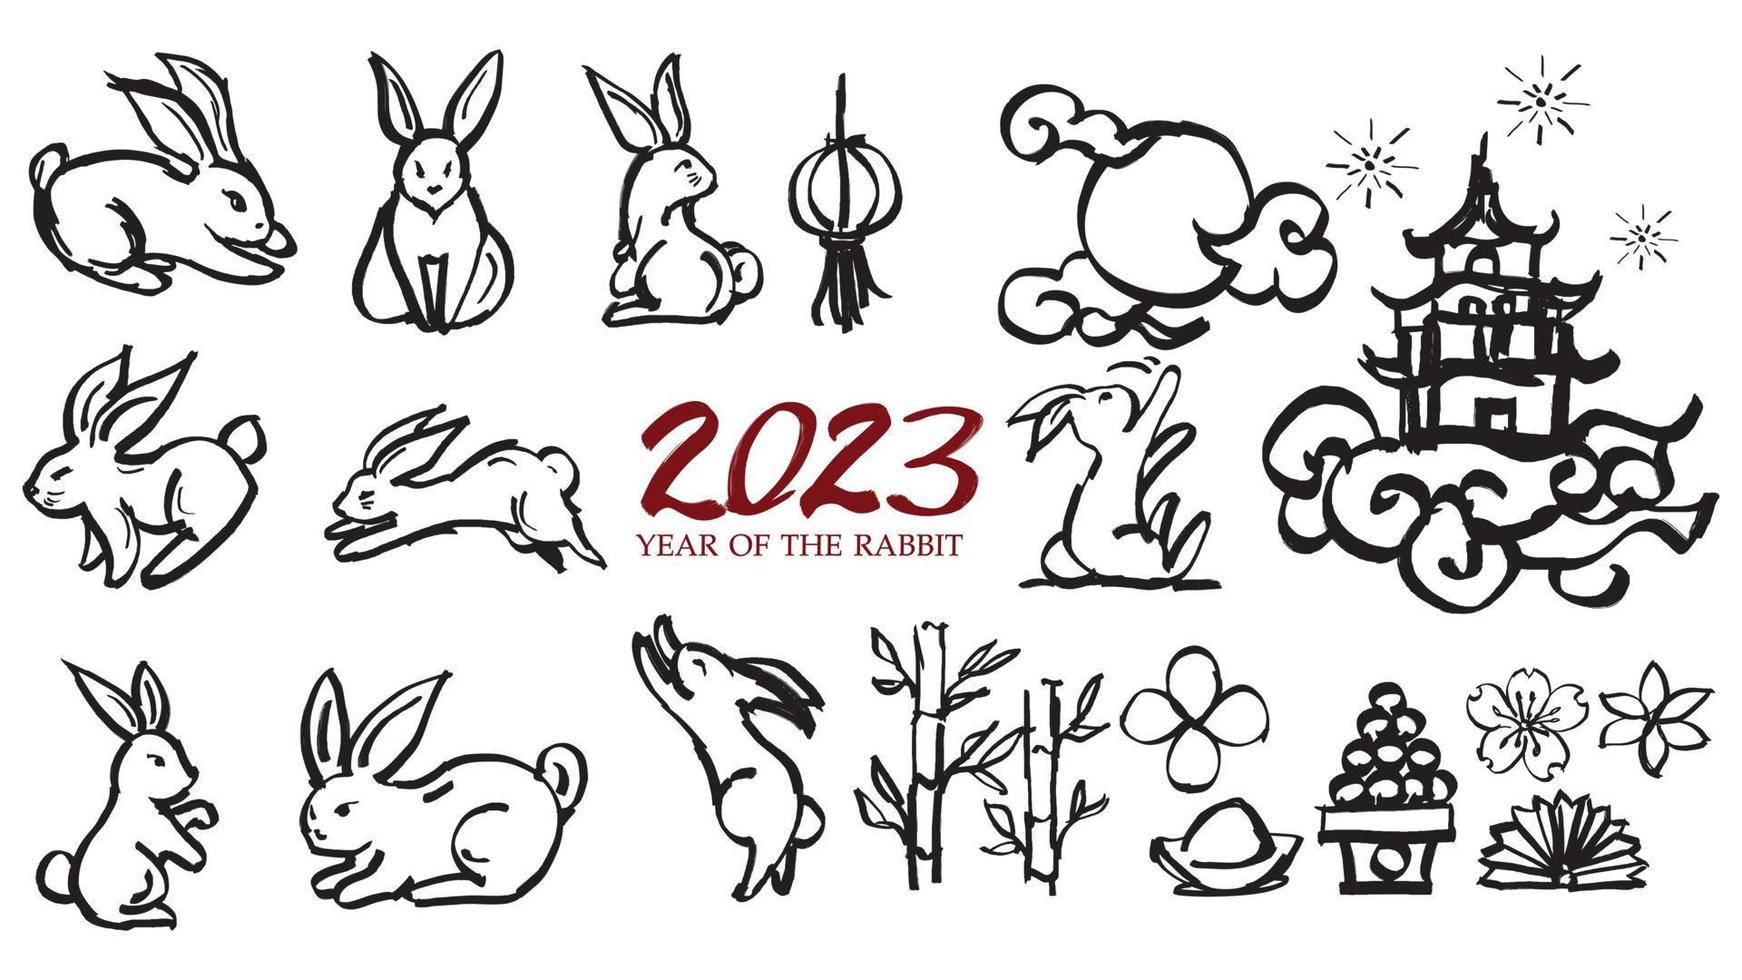 Year of the Rabbit 2023 ,Chinese brush strokes, rabbit and castle moon and offerings vector